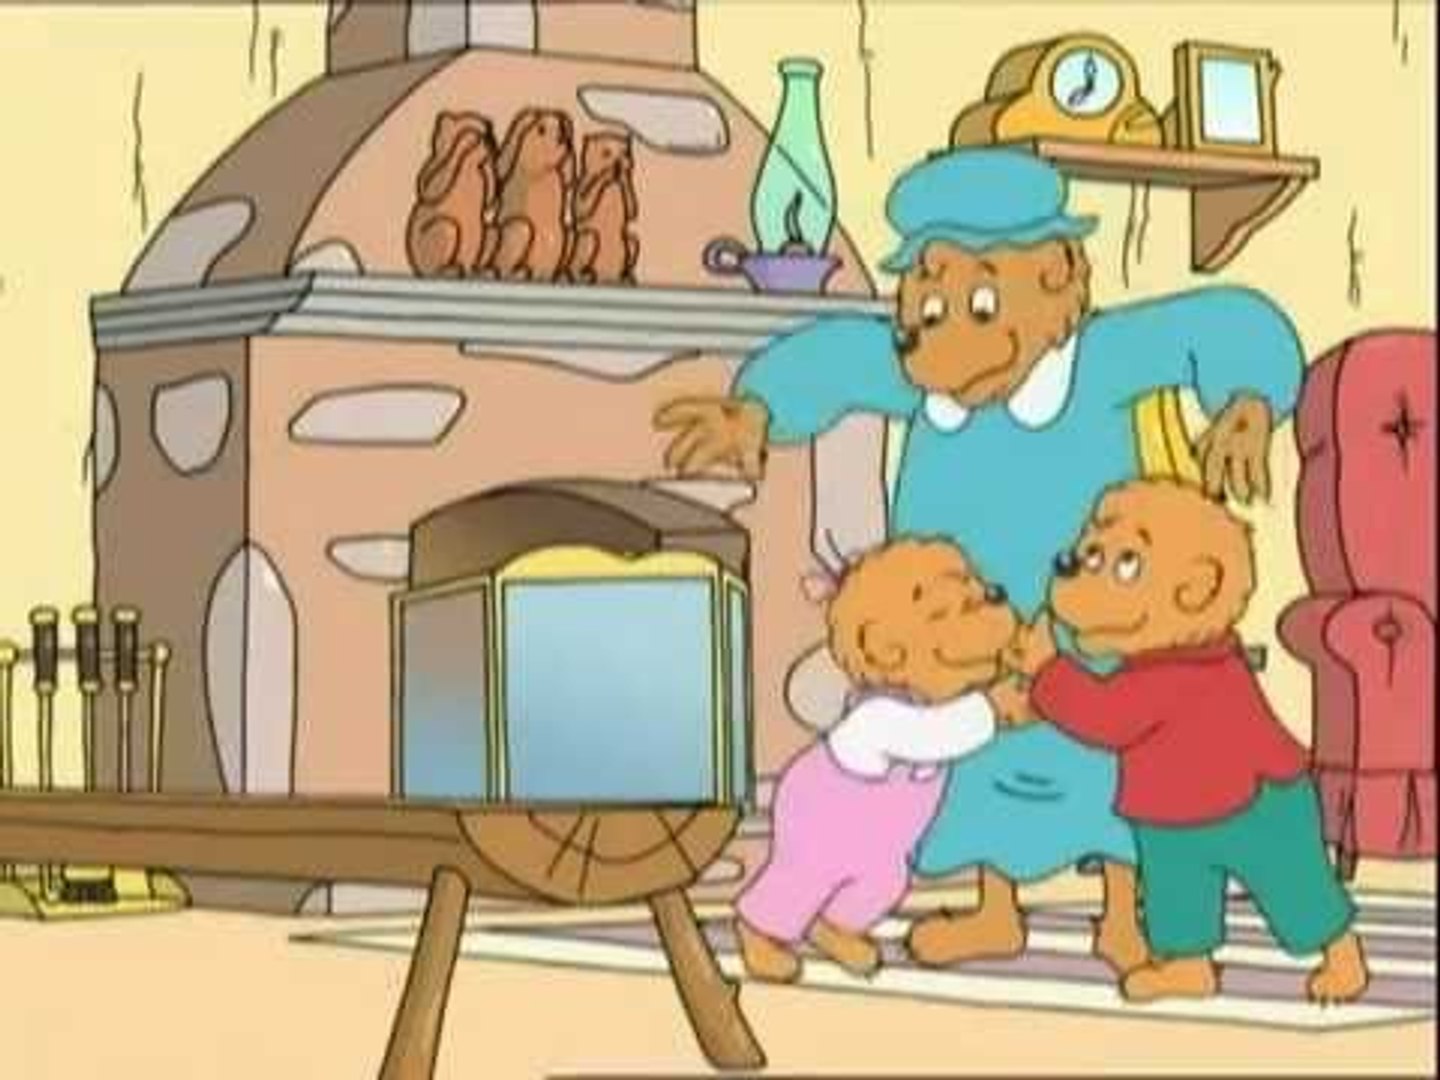 damien caraway recommends the berenstain bears videos pic